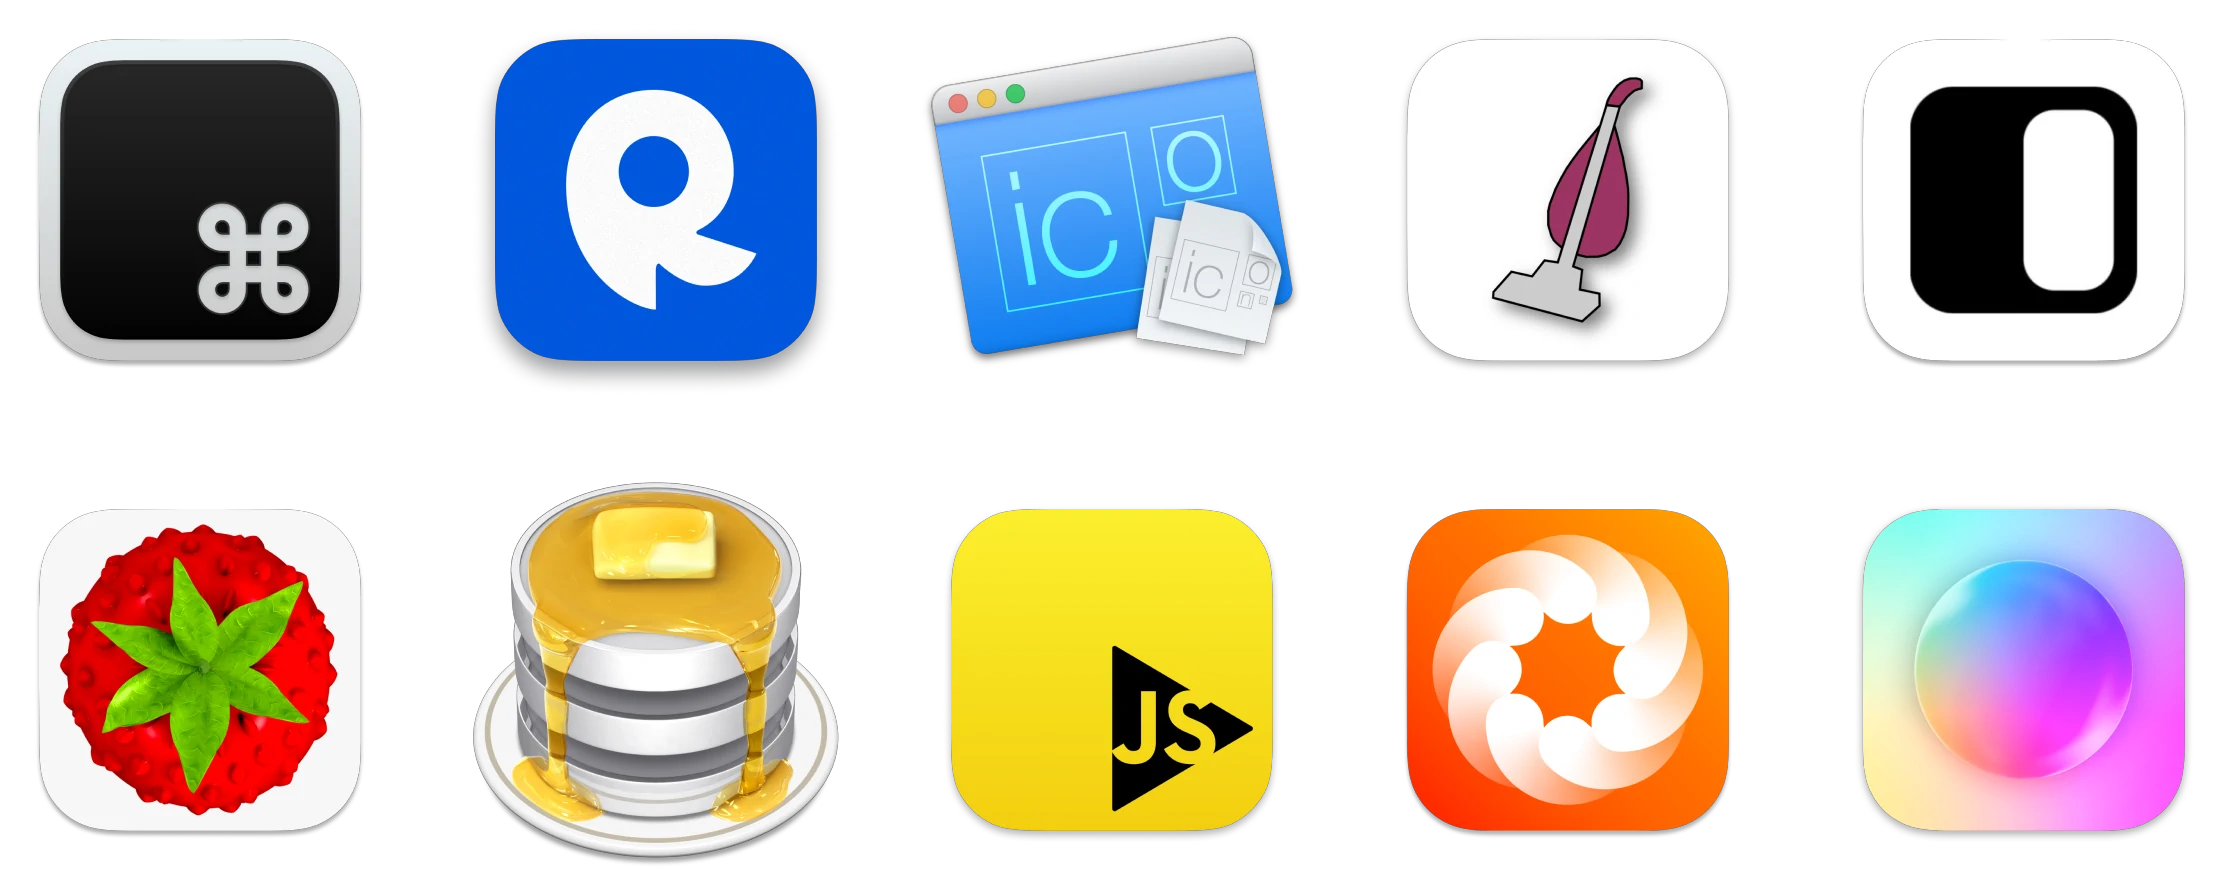 All app icons